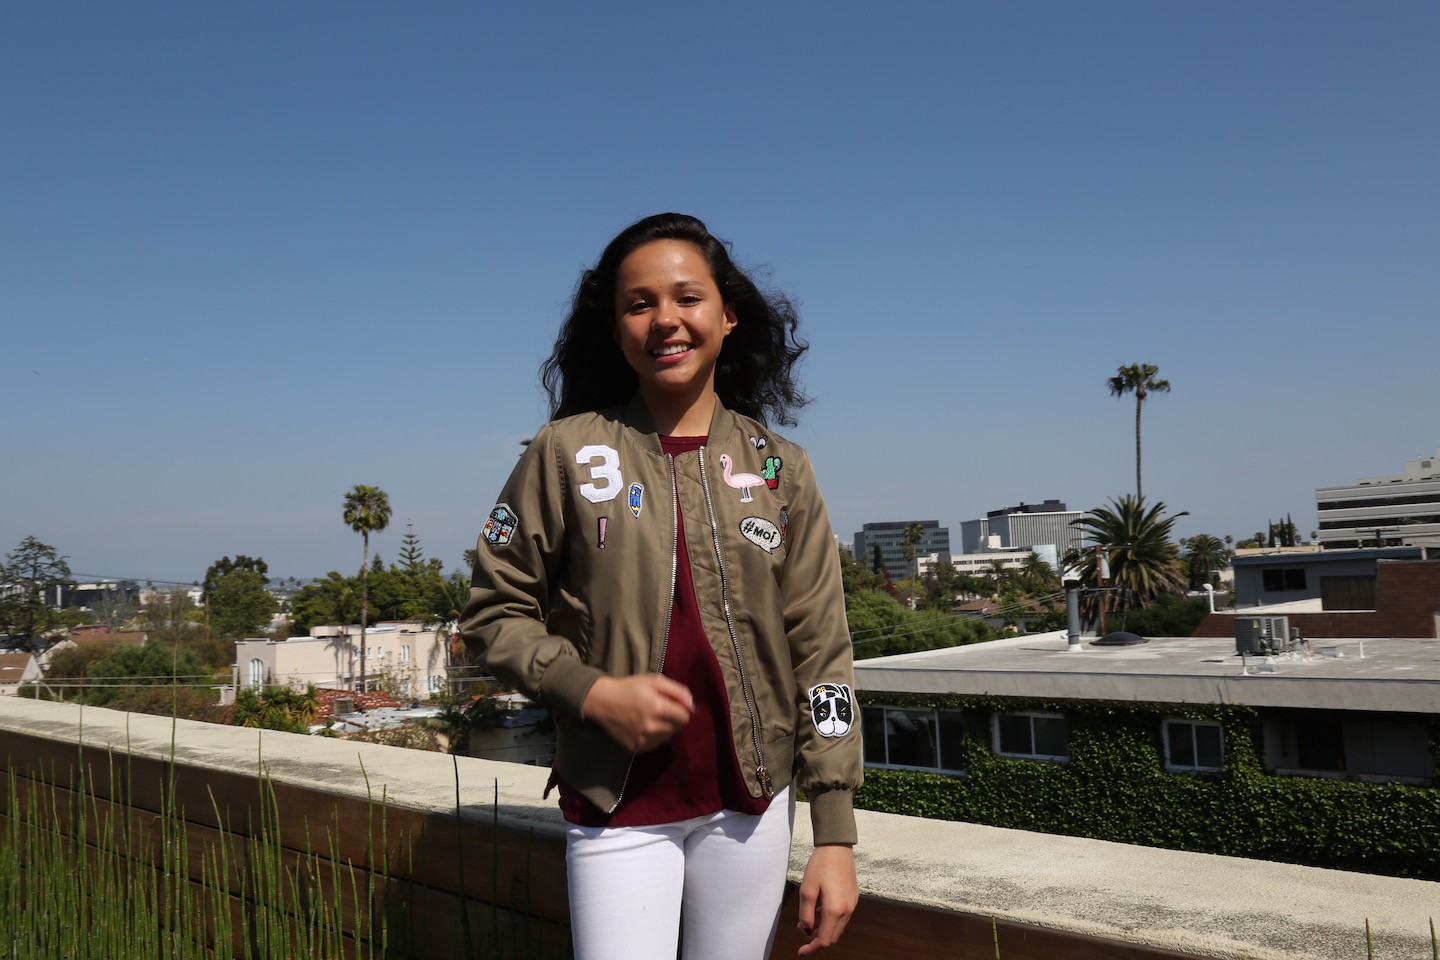 Nickelodeon queen Breanna Yde has been playing music since she was a kid! 